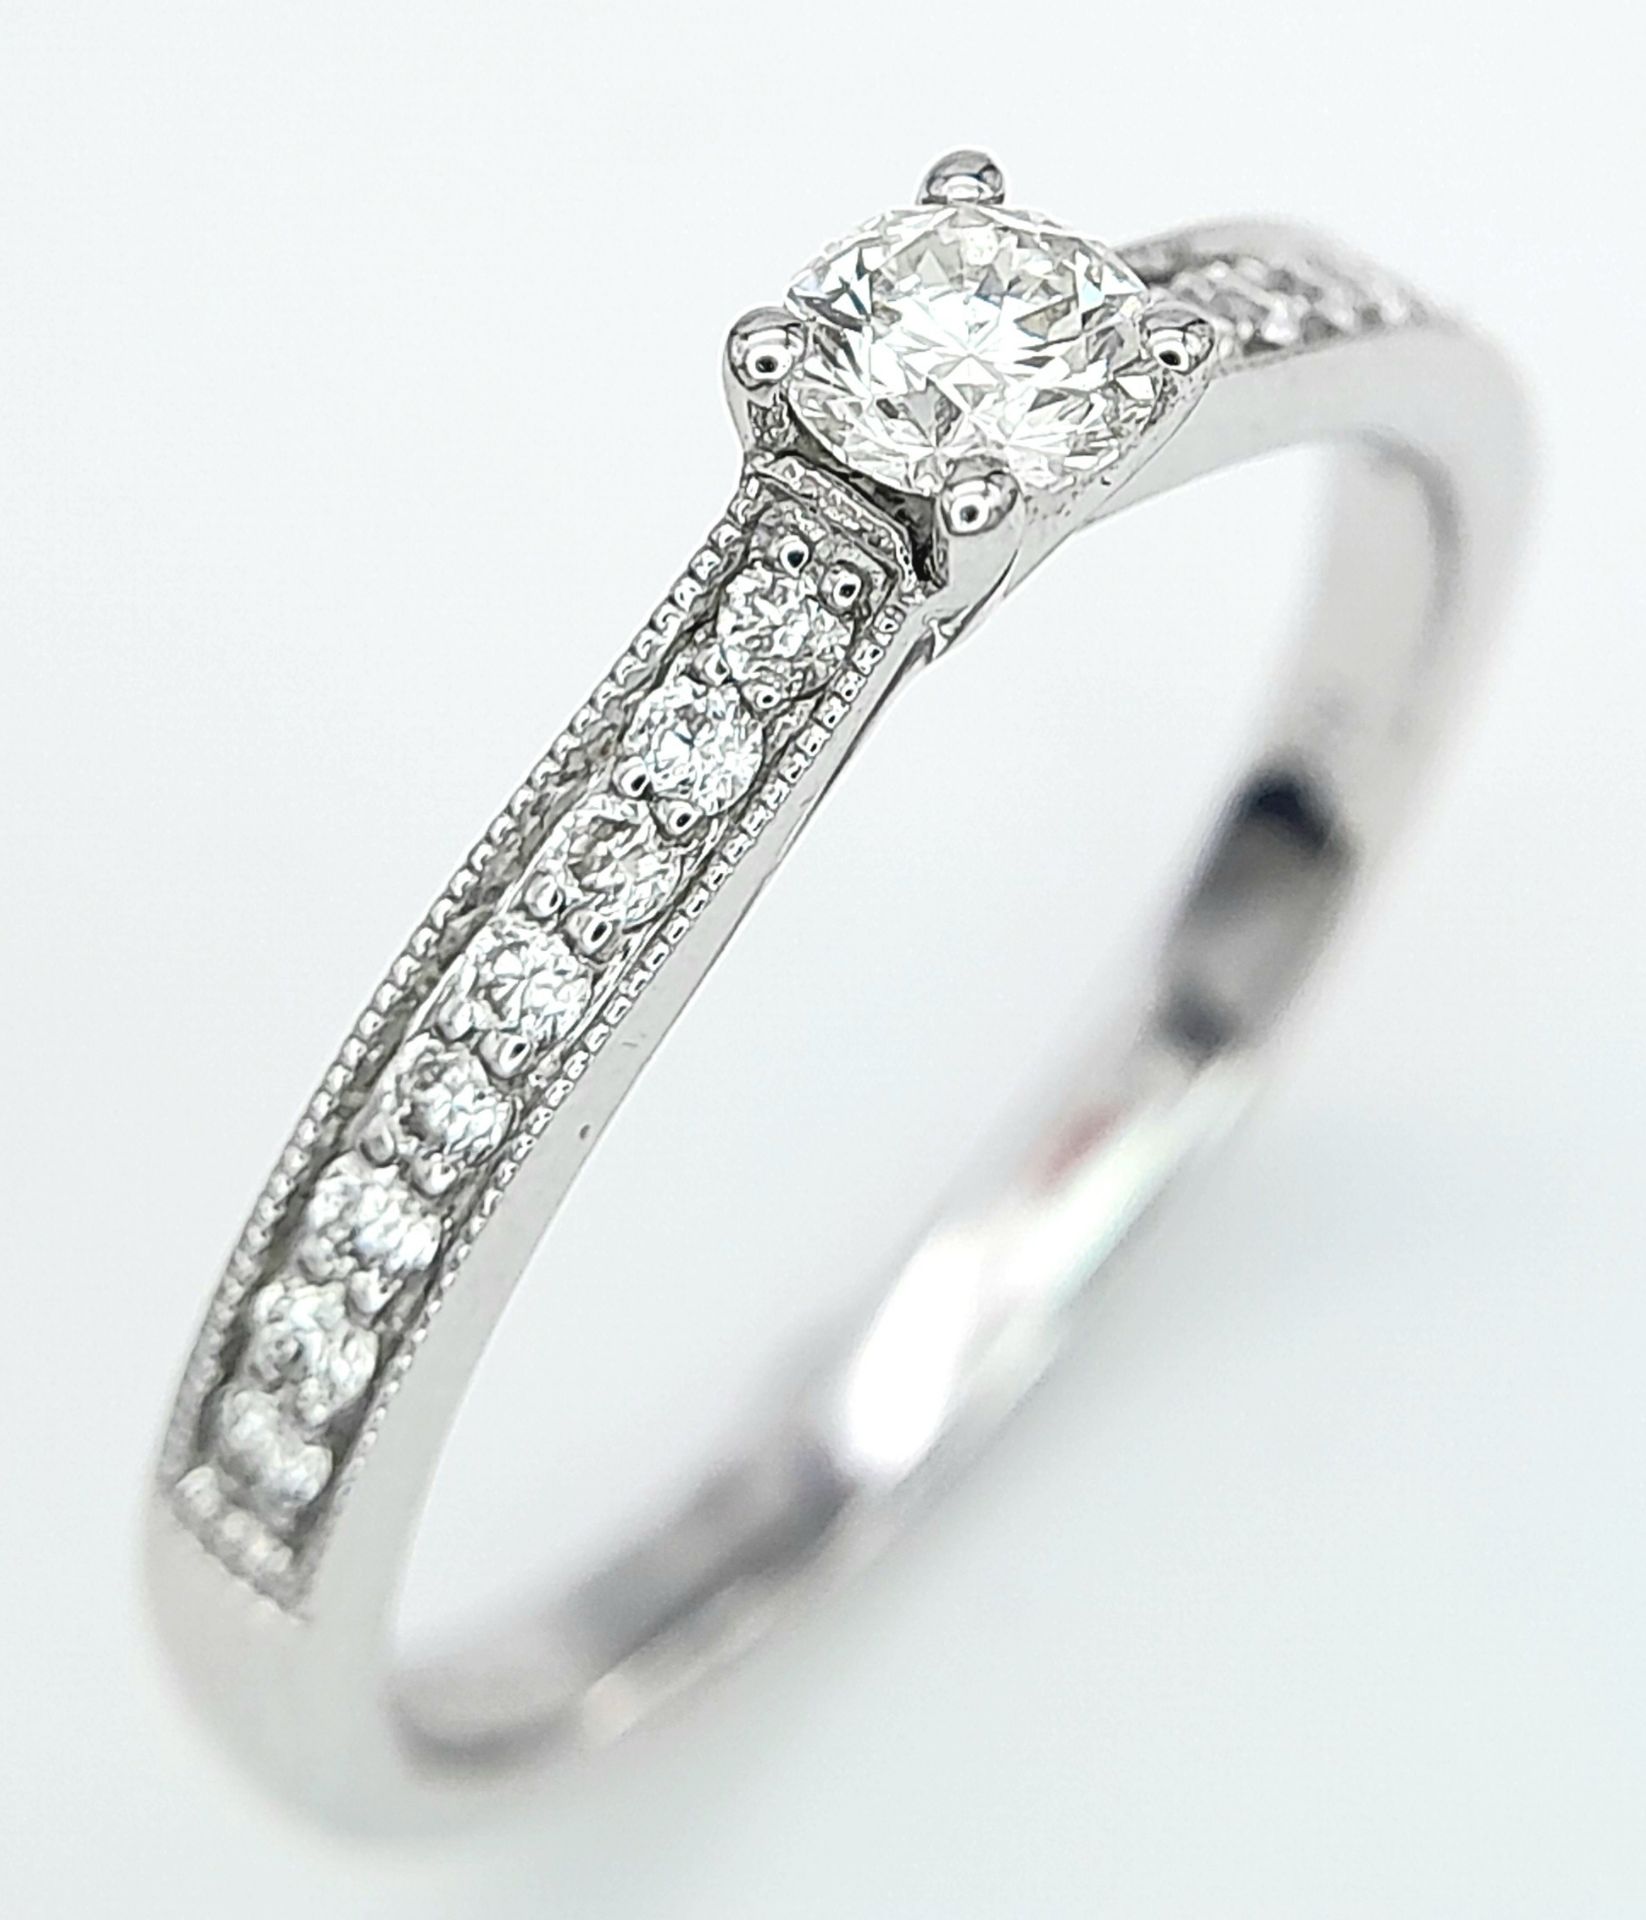 AN 18K WHITE GOLD DIAMOND SOLITAIRE RING - WITH DIAMOND SET SHOULDERS. 0.35CT. TOTAL 2.6G. SIZE N - Image 3 of 5